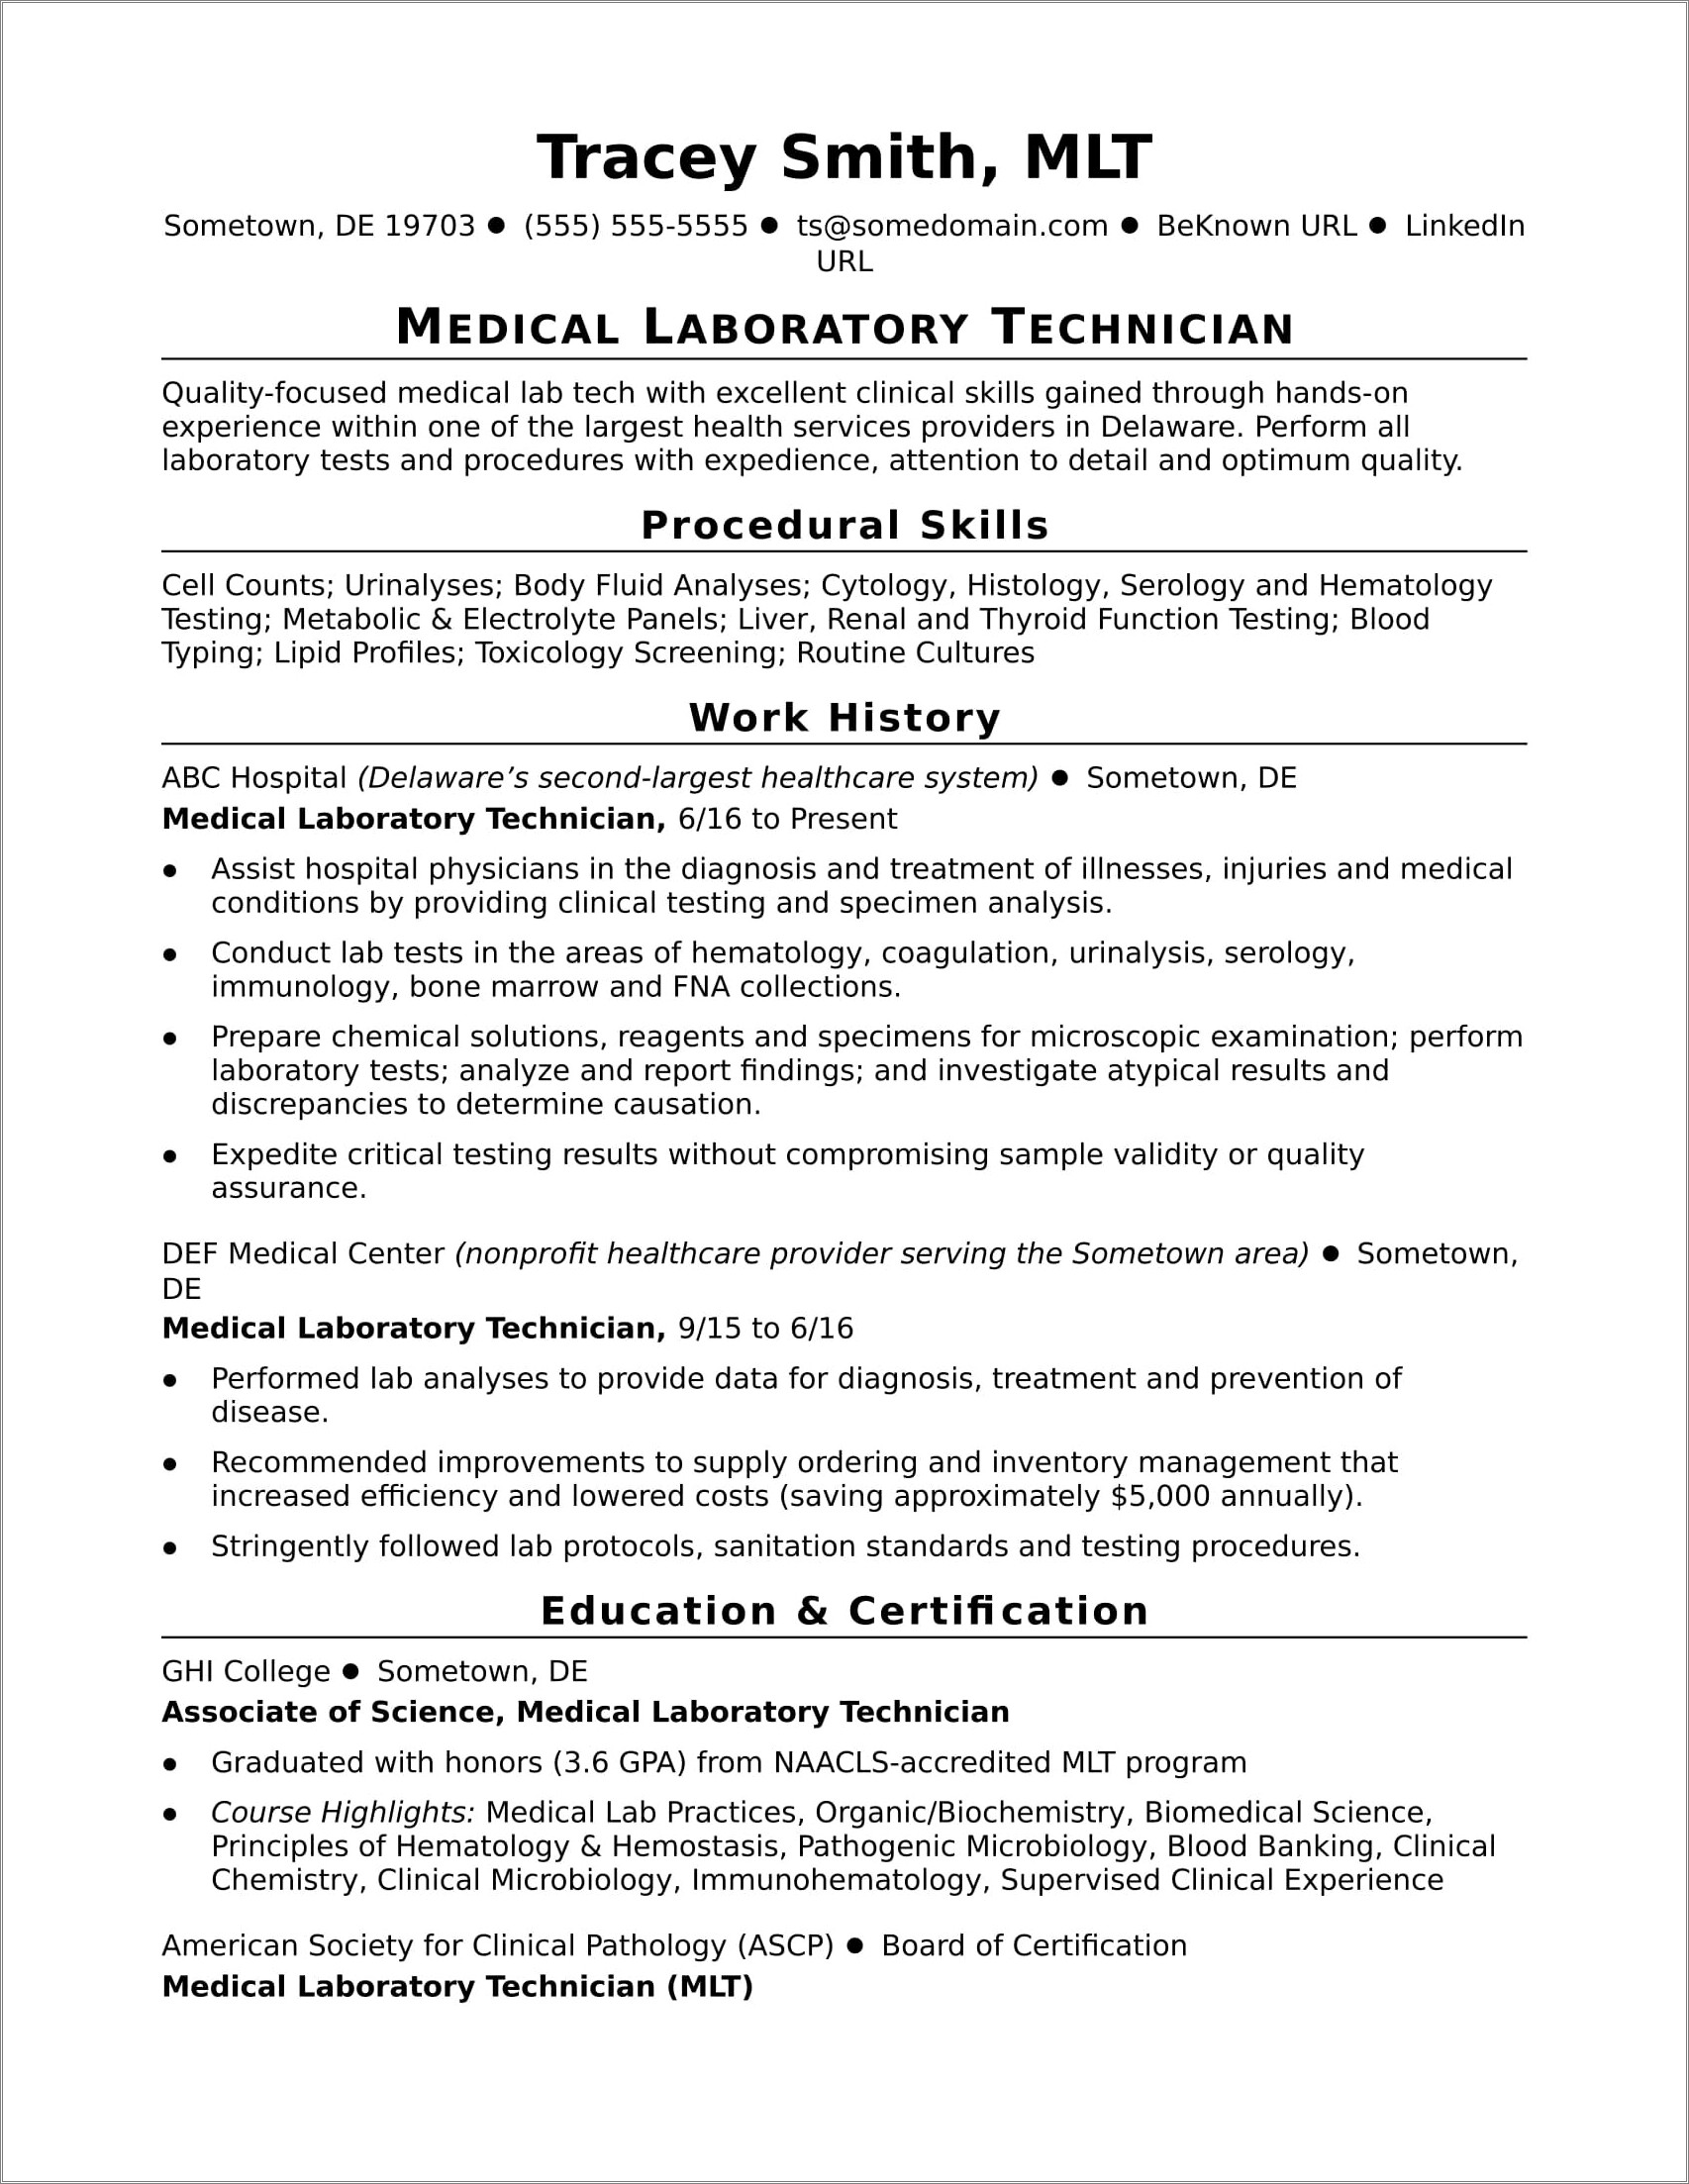 Resume Objective About Working In A Laboratory